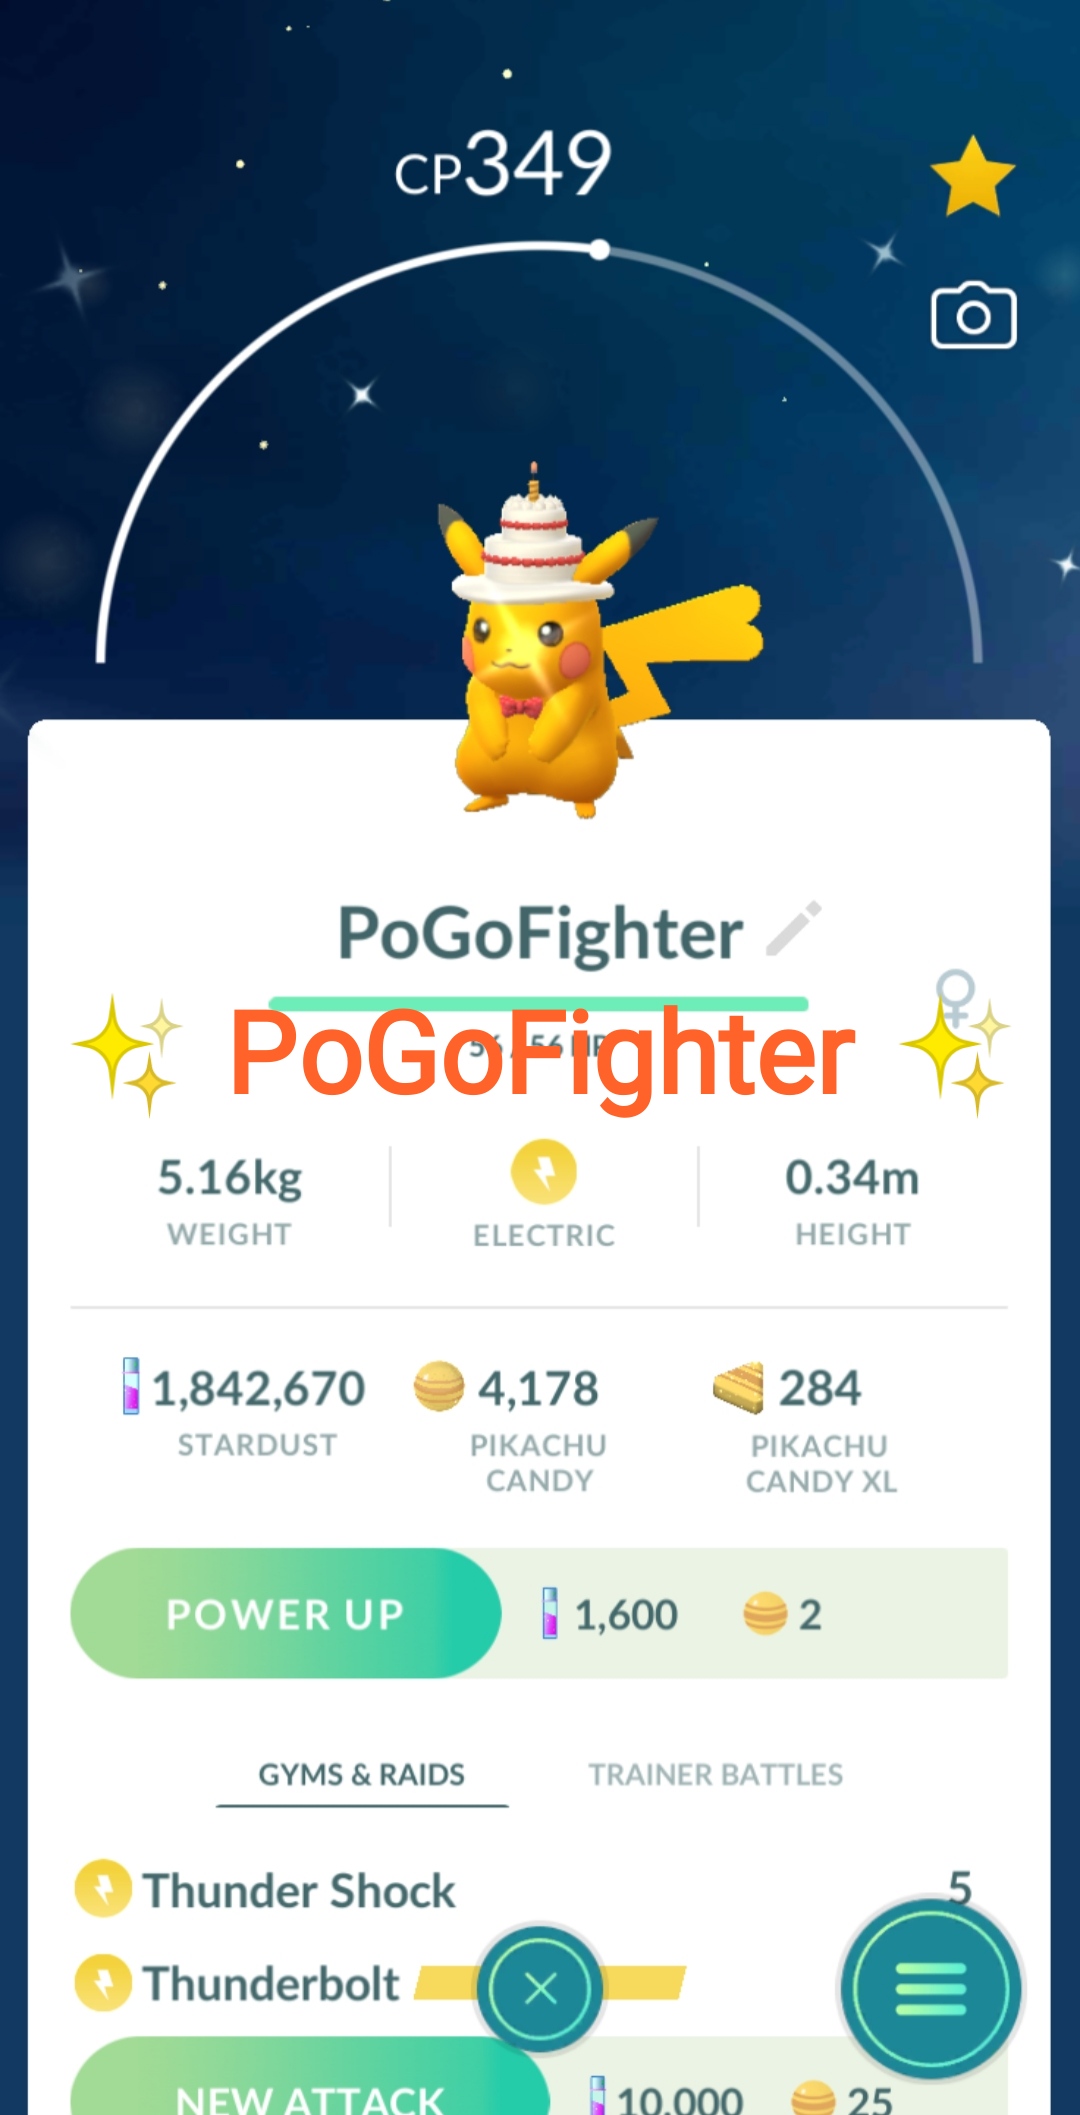 How to get Shiny Cake Hat Pikachu and Party Hat Pikachu in Pokemon GO?